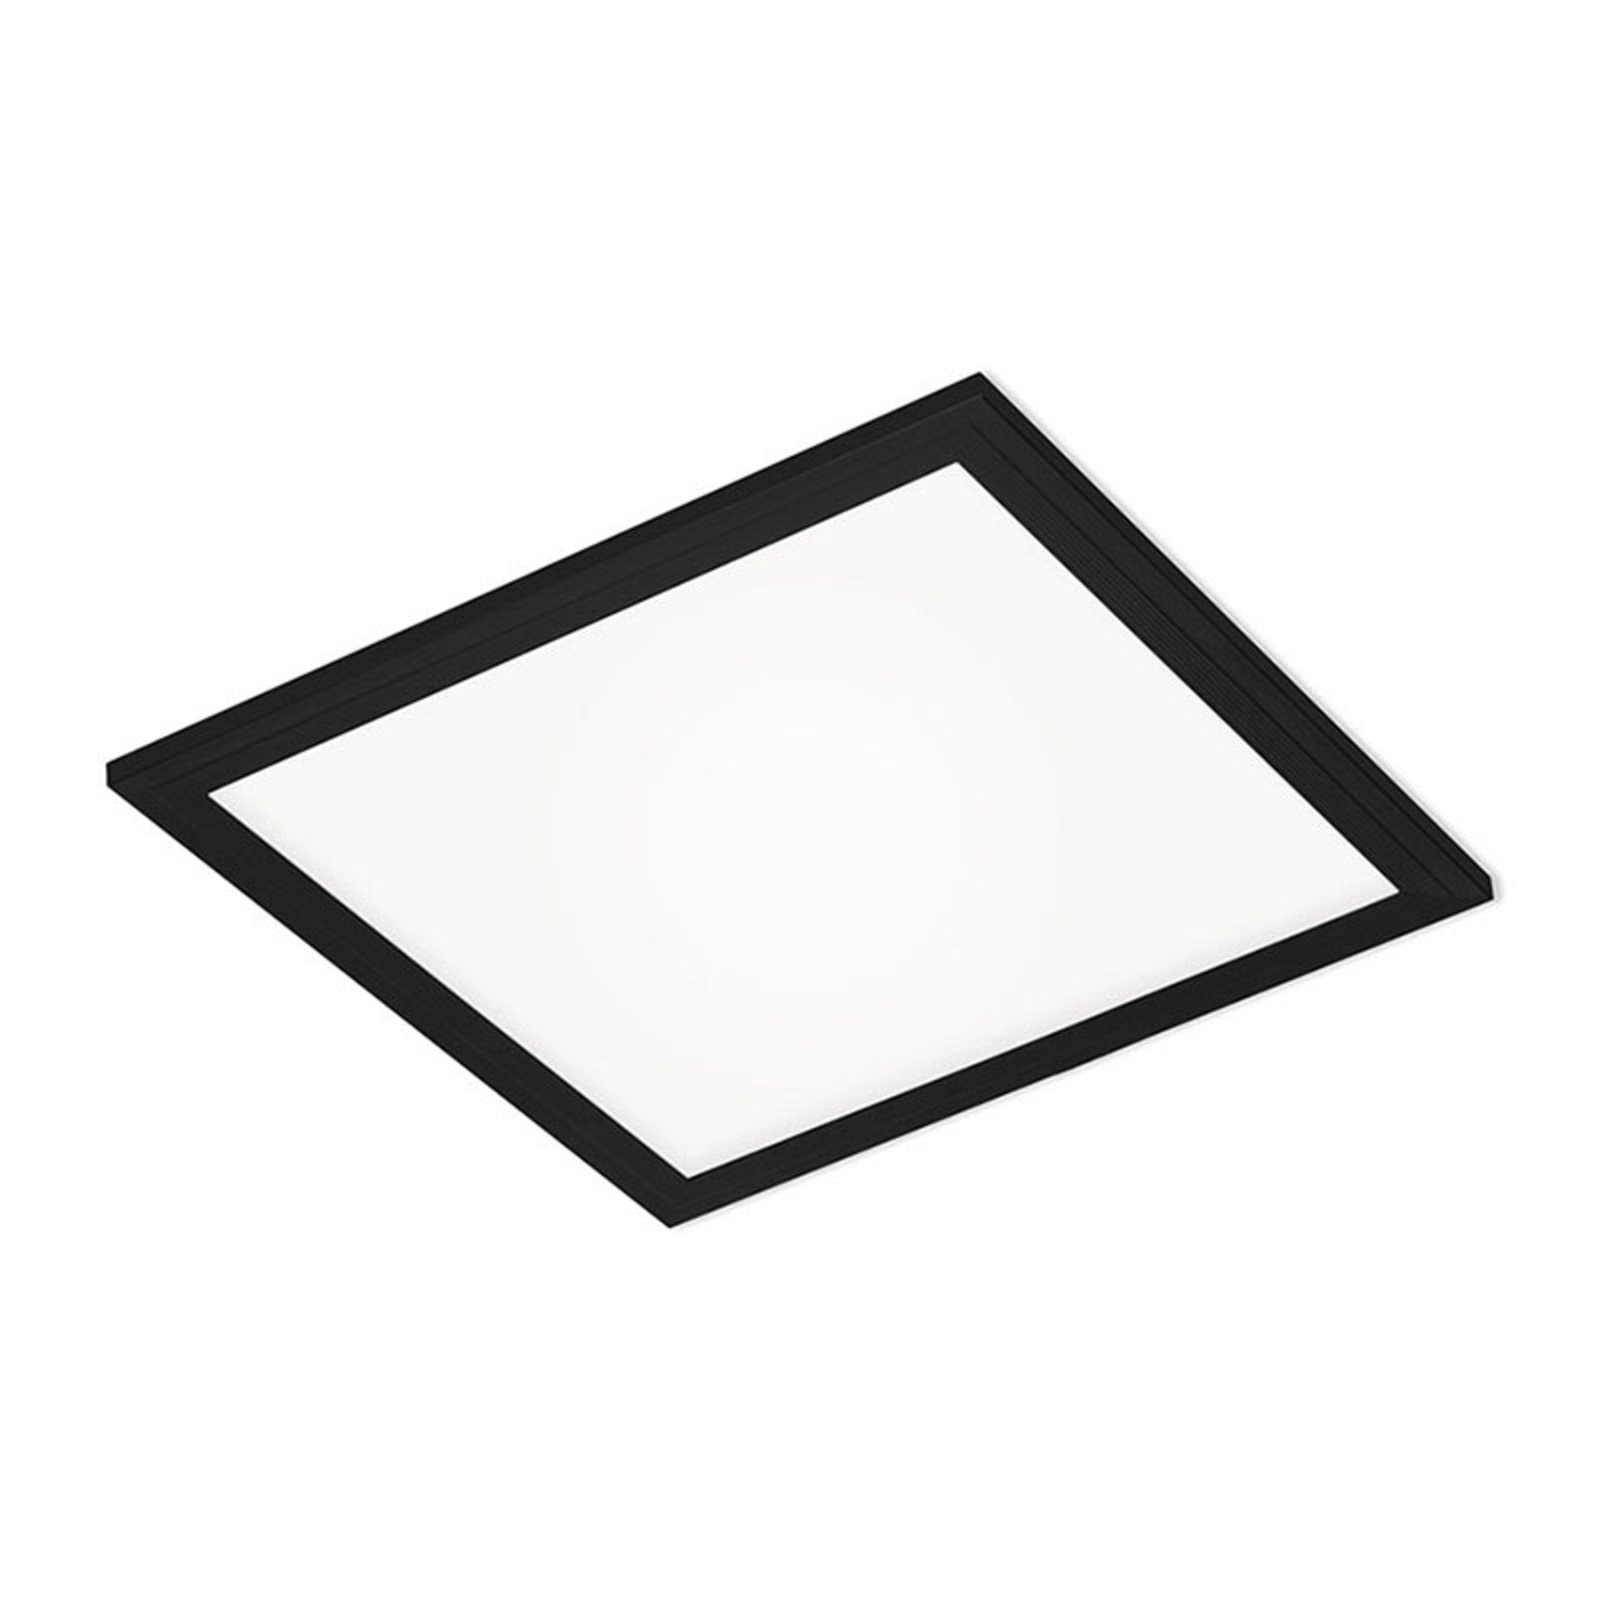 Painel LED Simples, preto, ultra-plano, 30x30cm